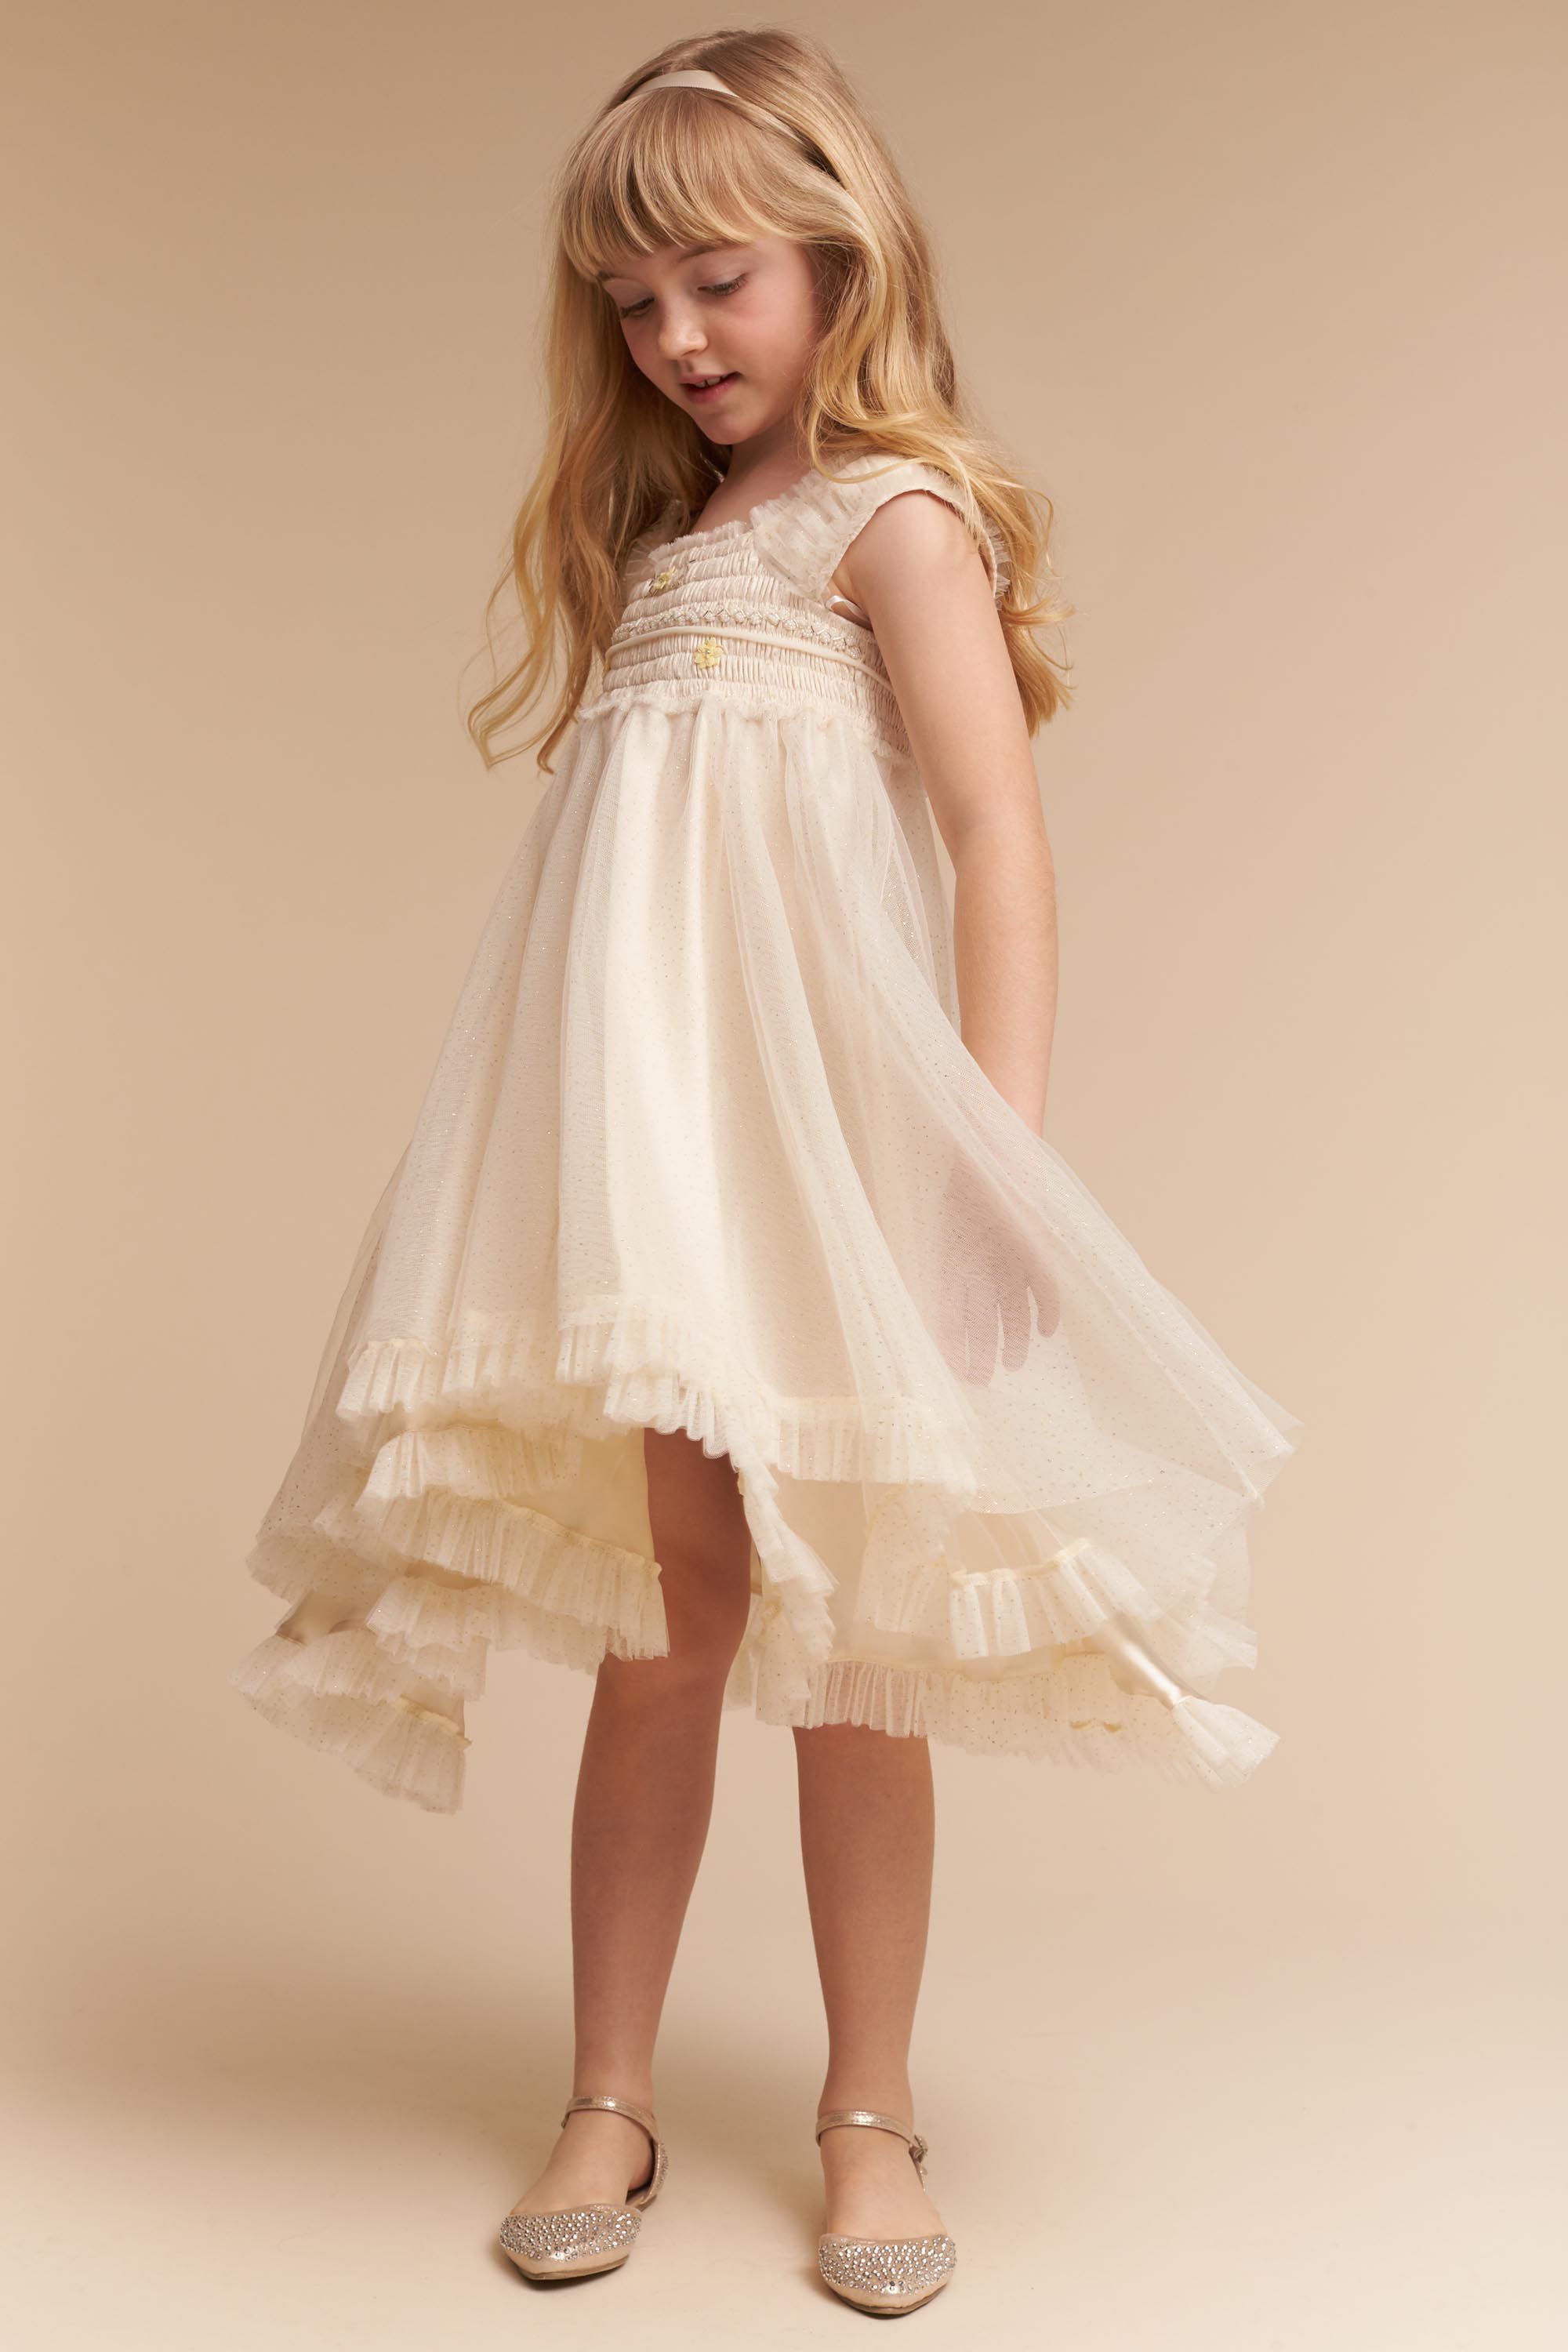 The Most Popular Flower Girl Dresses Fashion Industry Network